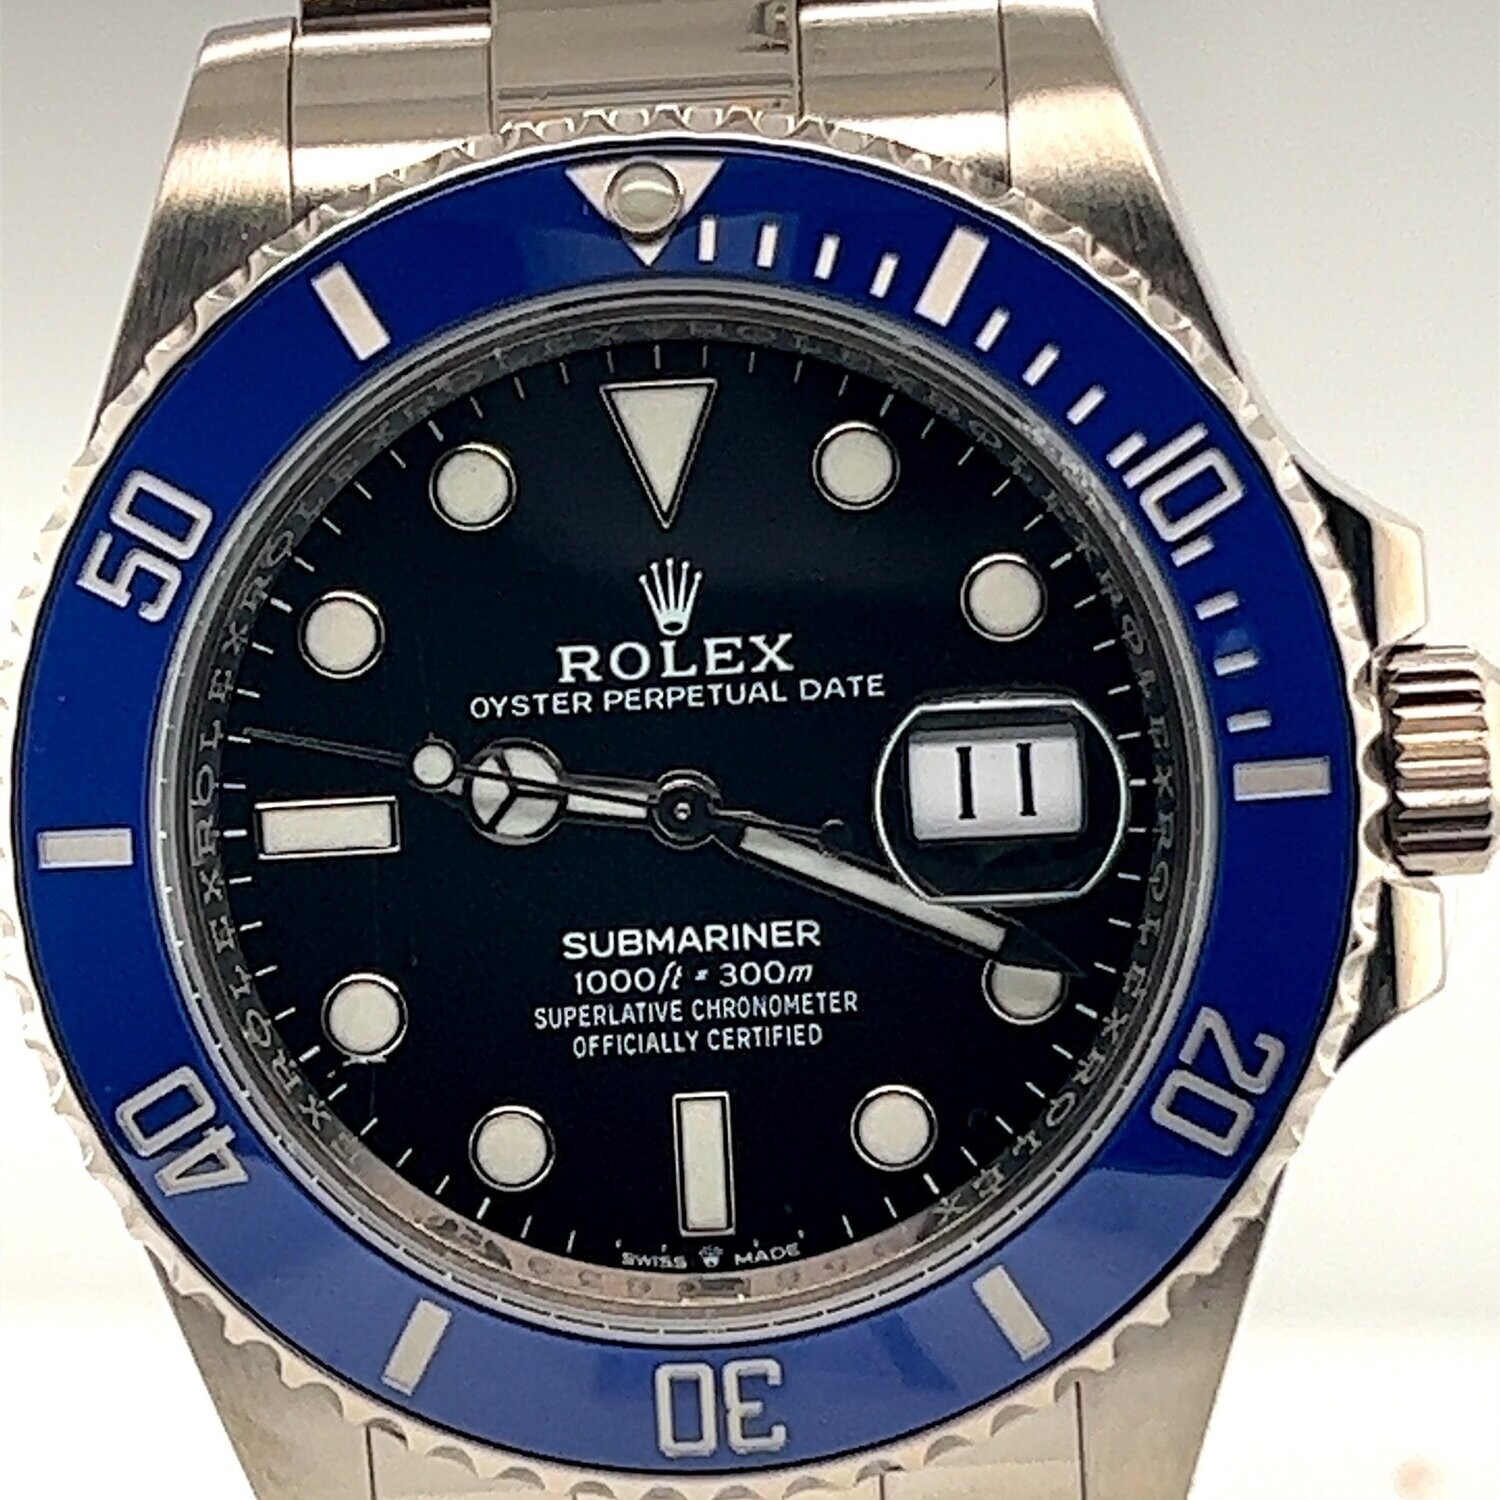 Rolex 41mm Submariner Date, White Gold - Blue Bezel and Black Dial